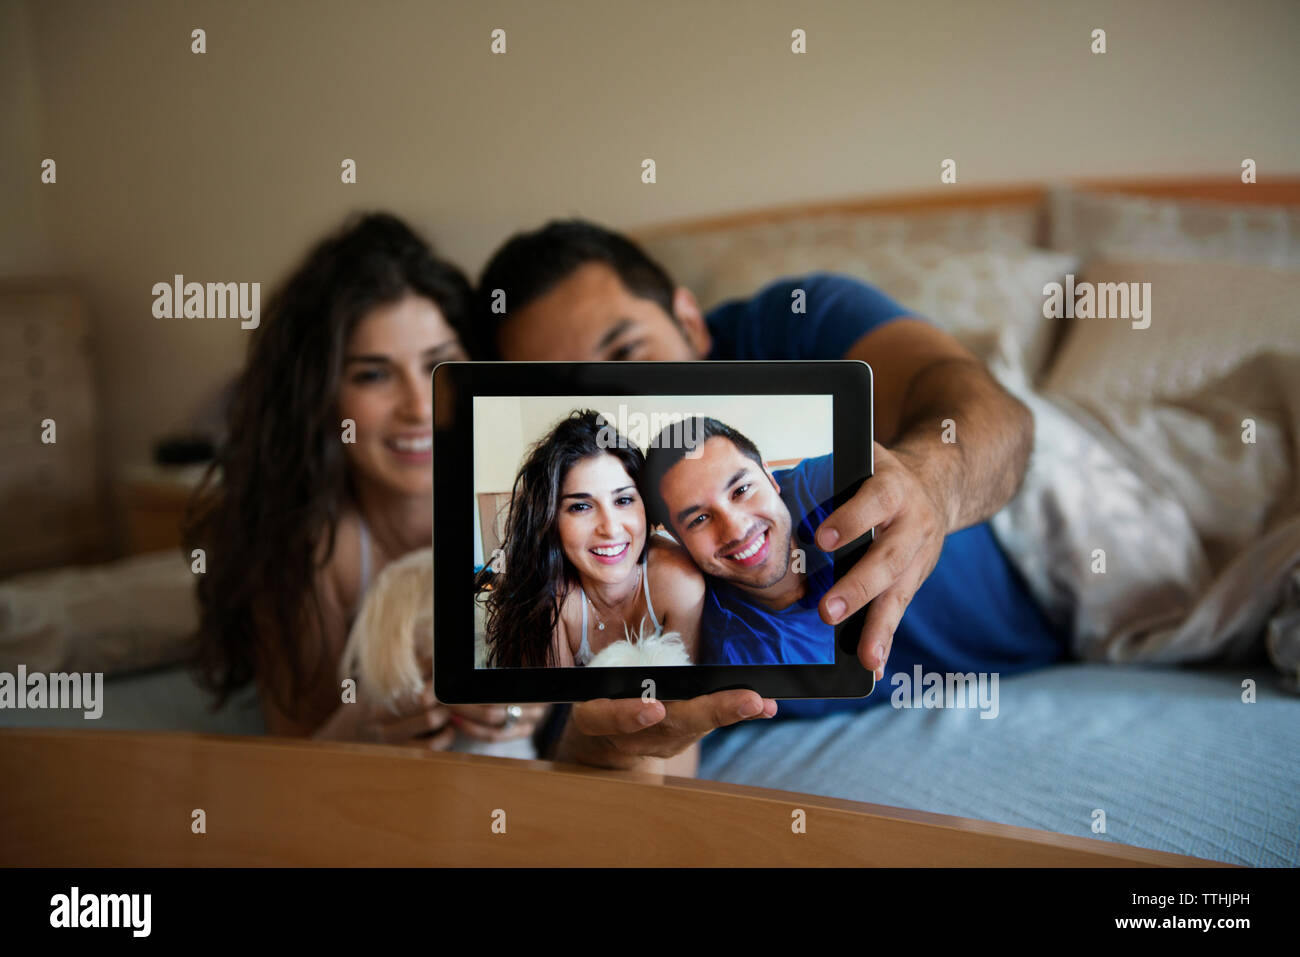 Happy couple taking selfie through tablet computer while relaxing on bed Stock Photo